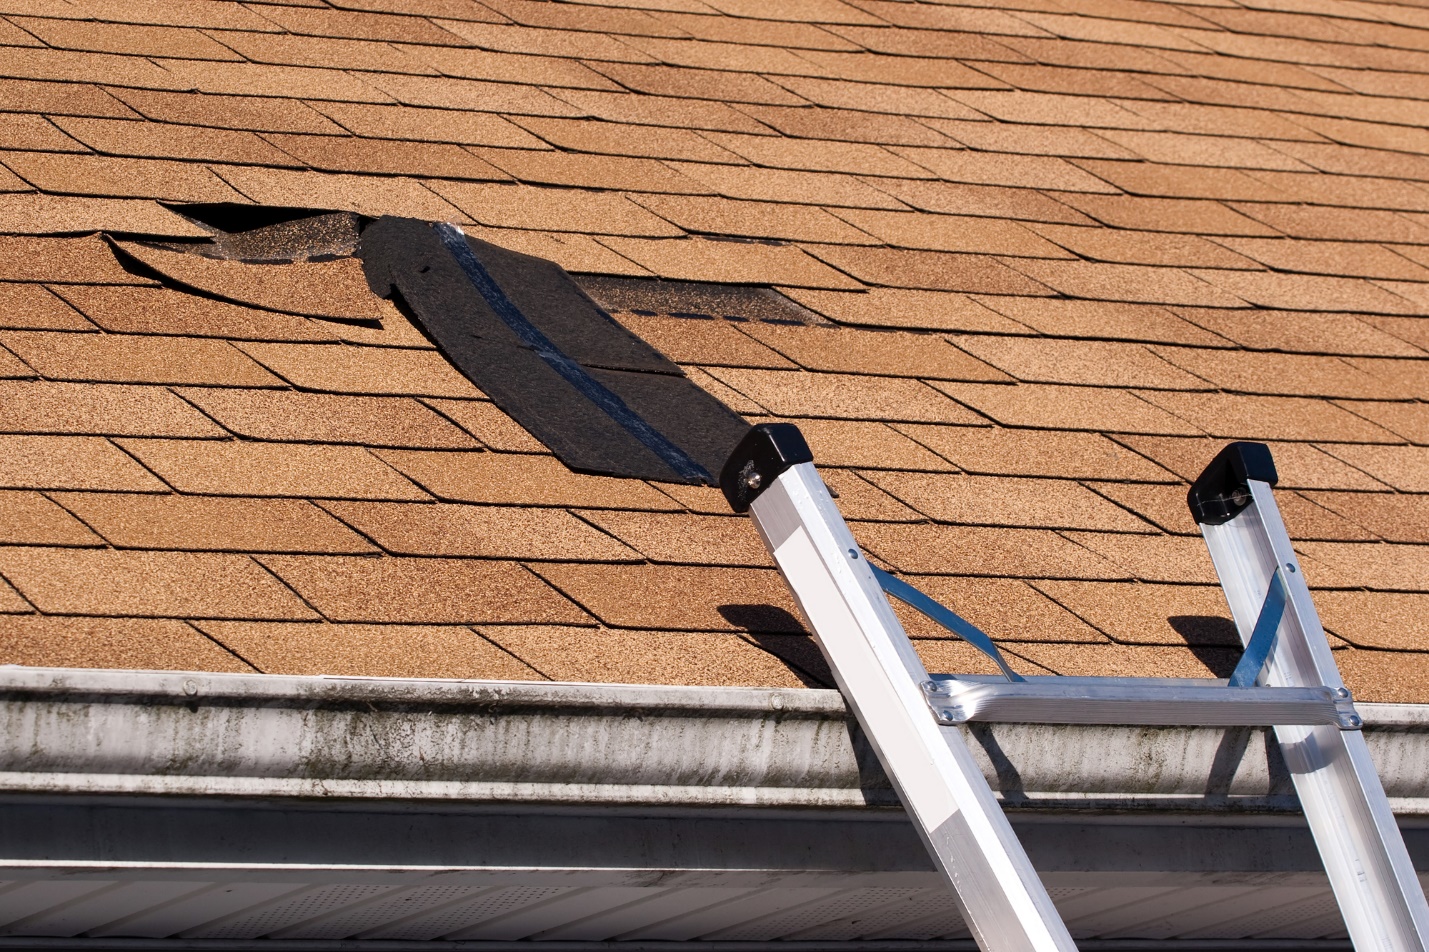 5 Roofing Pests that Can Damage Your Roof